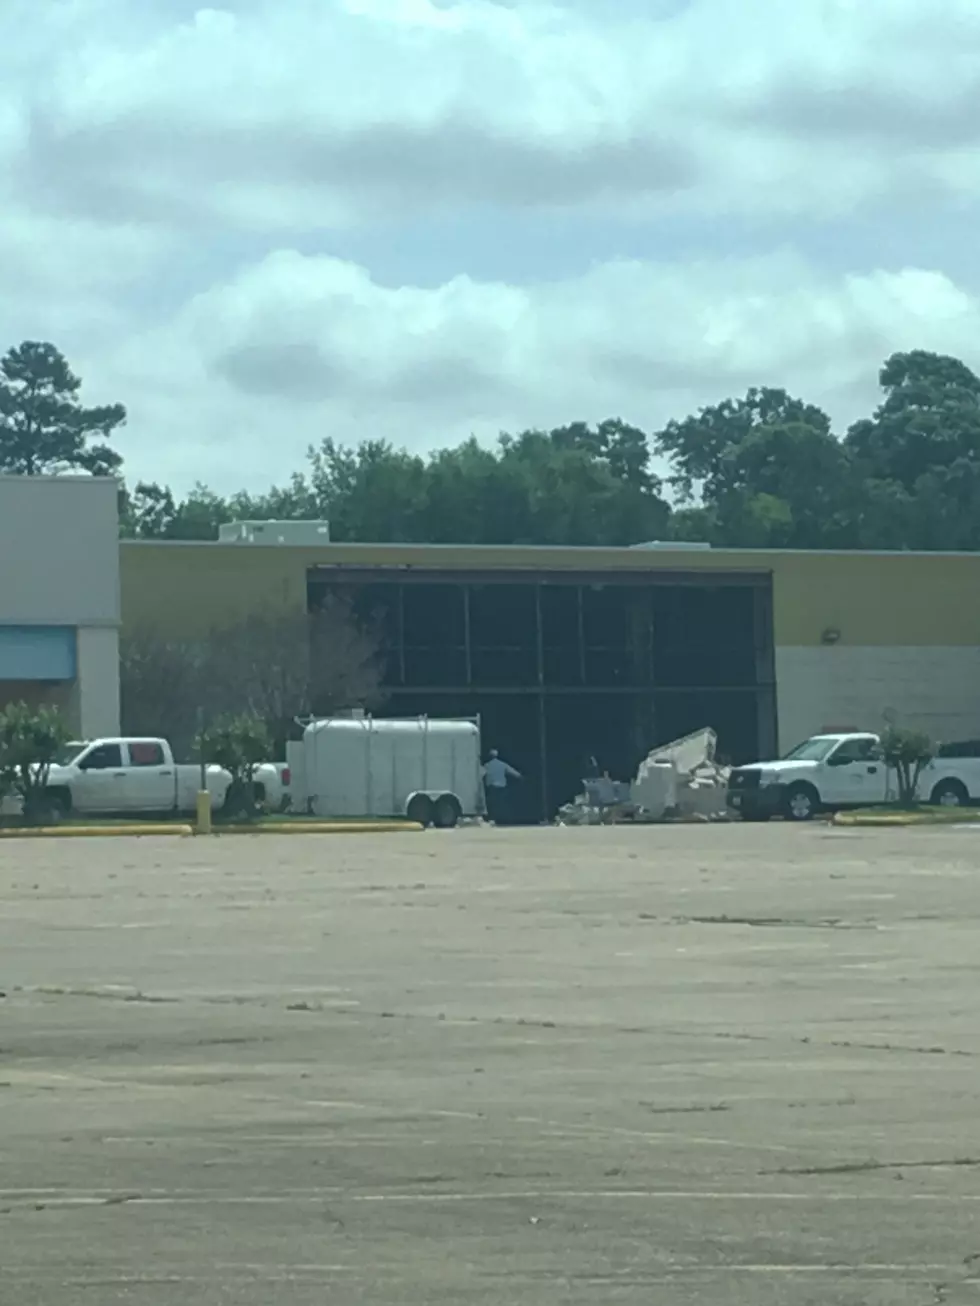 Change Is Now Underway At University Mall In Nacogdoches [PHOTOS]